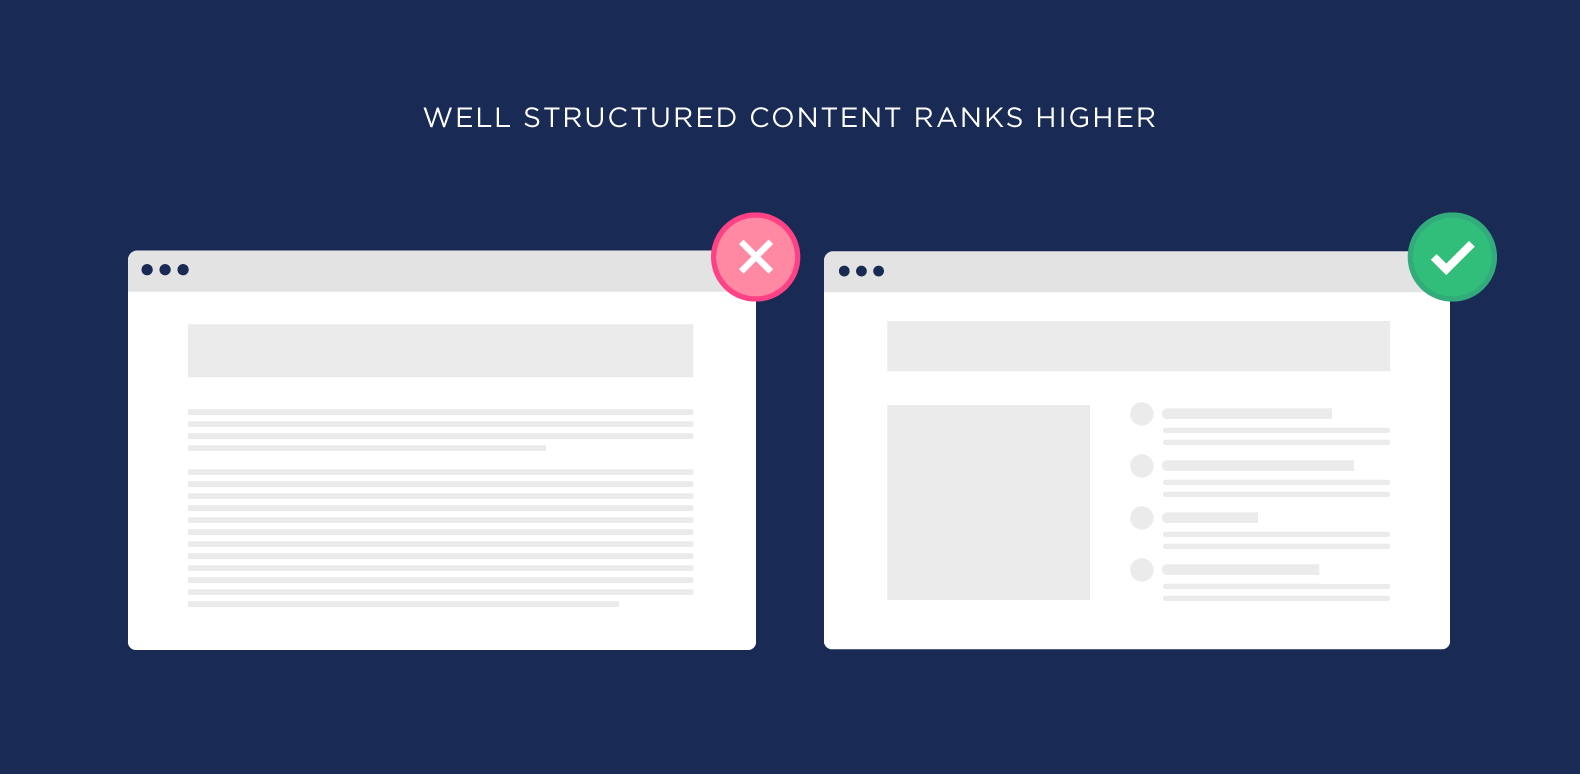 Well-structured content ranks higher